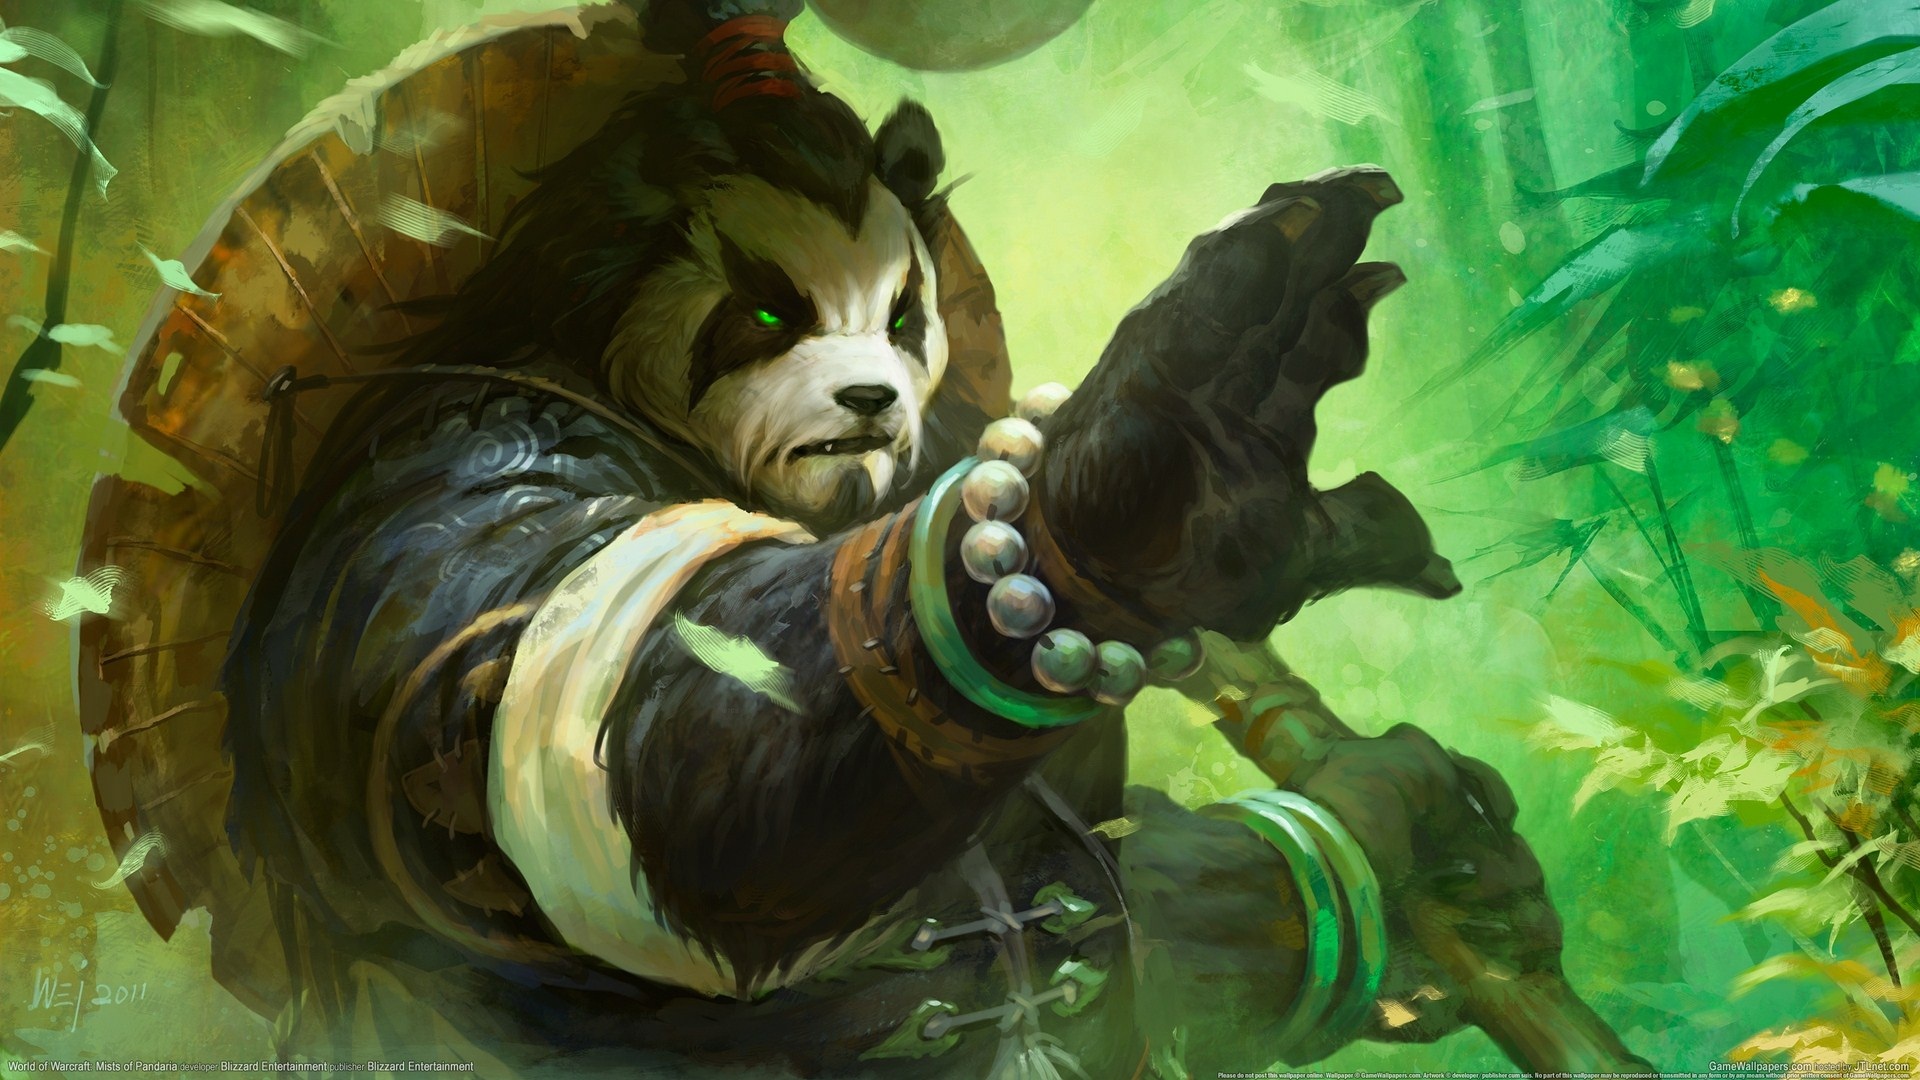 World of Warcraft: Mists of Pandaria HD wallpapers #11 - 1920x1080